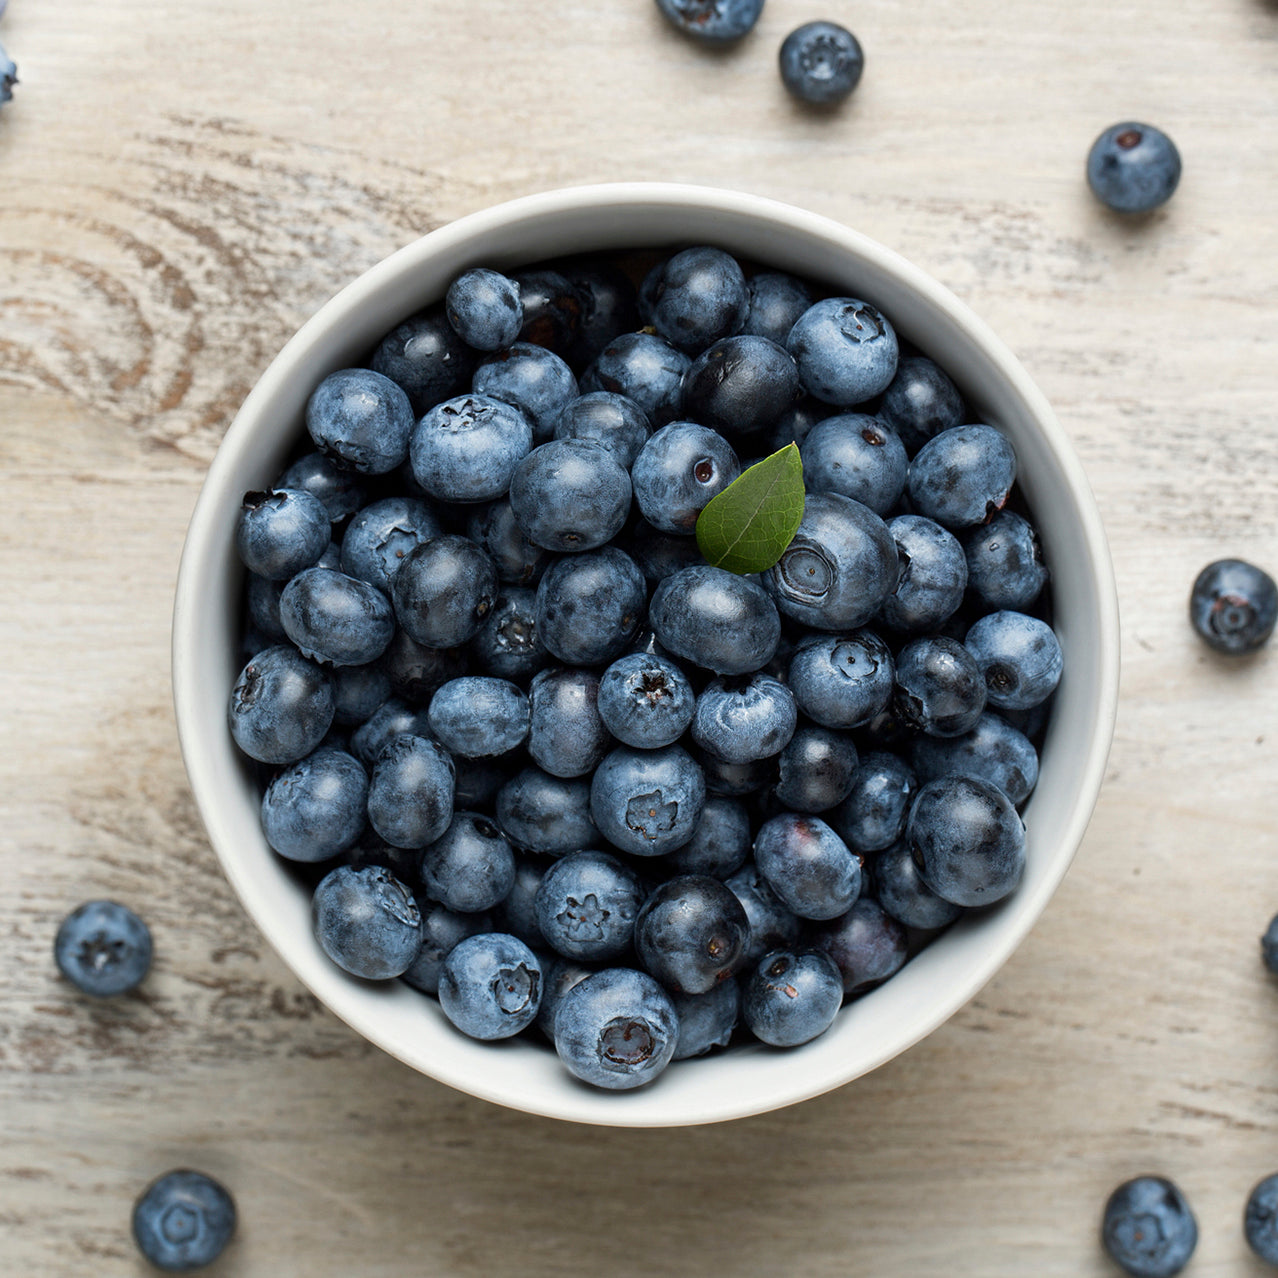 Antioxidants, Inflammation and Free Radicals…What does it all Mean?